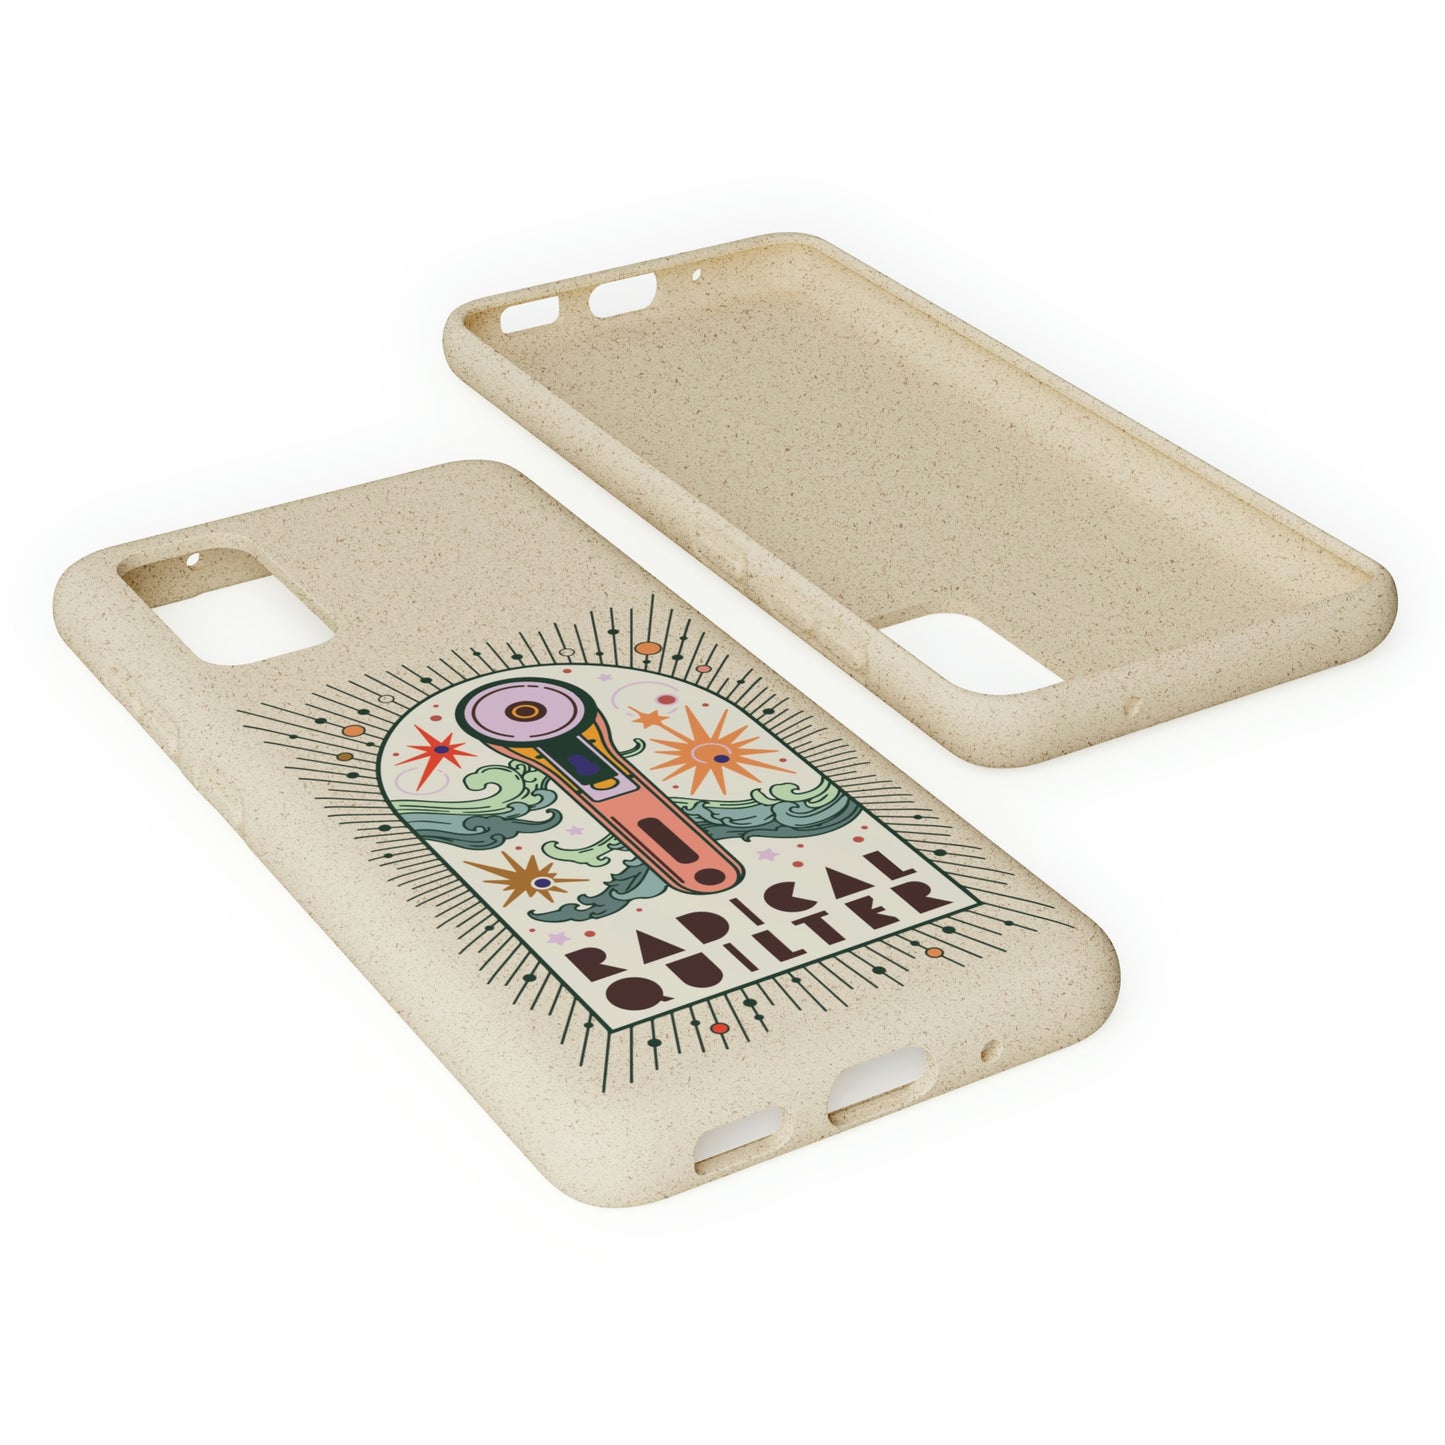 Radical Quilter Biodegradable Phone Case